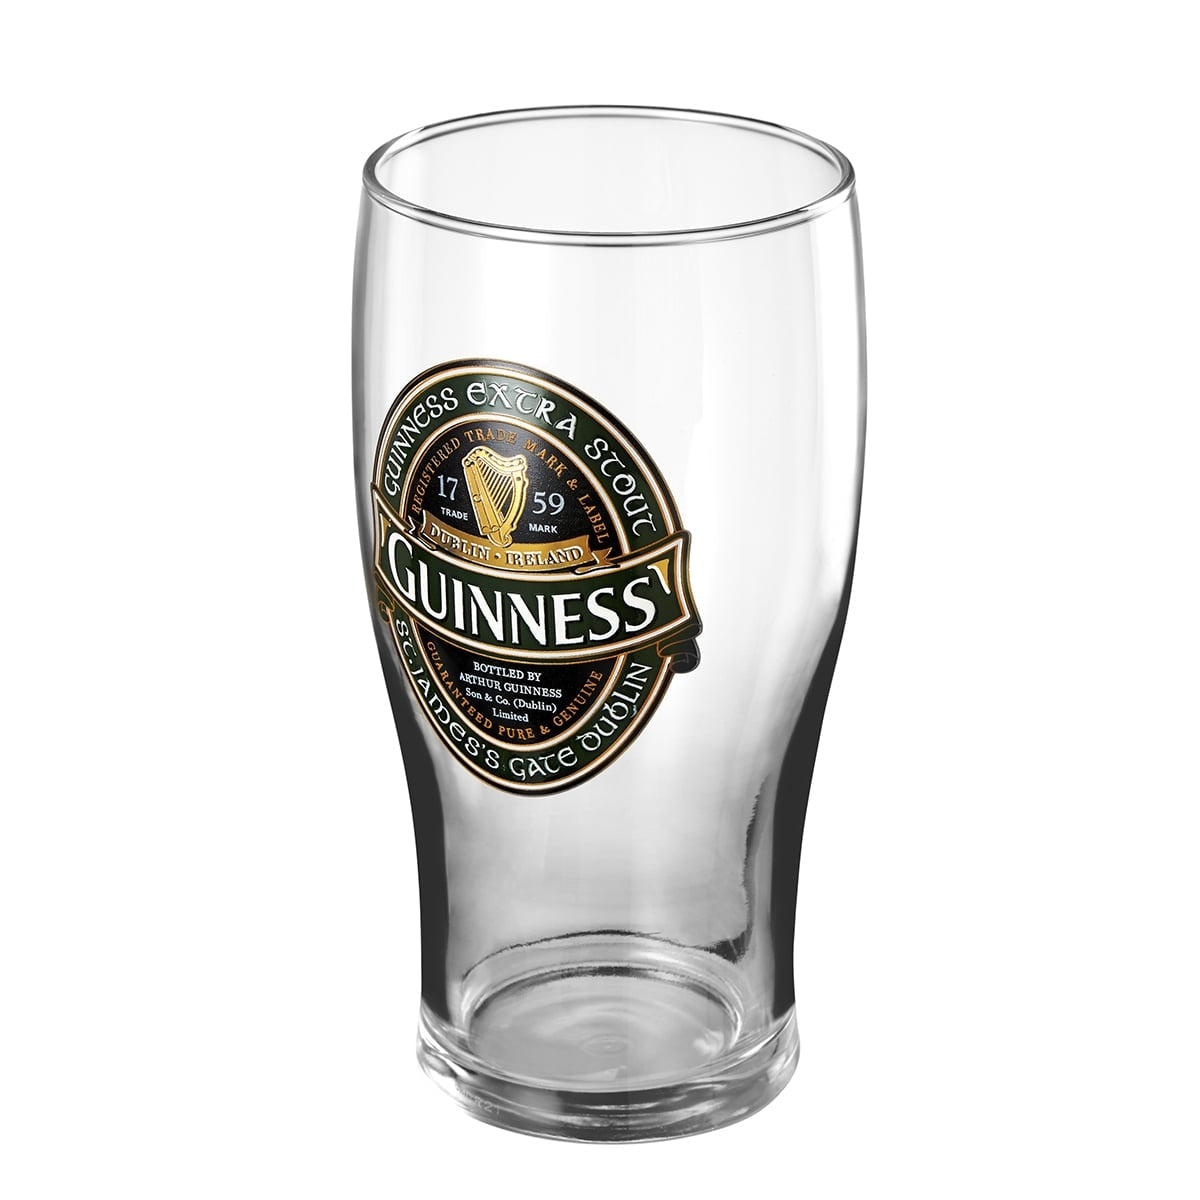 This Guinness Ireland Collection Pint Glass - 2 Pack, straight from Ireland, is the perfect addition to any collection of pint glasses.